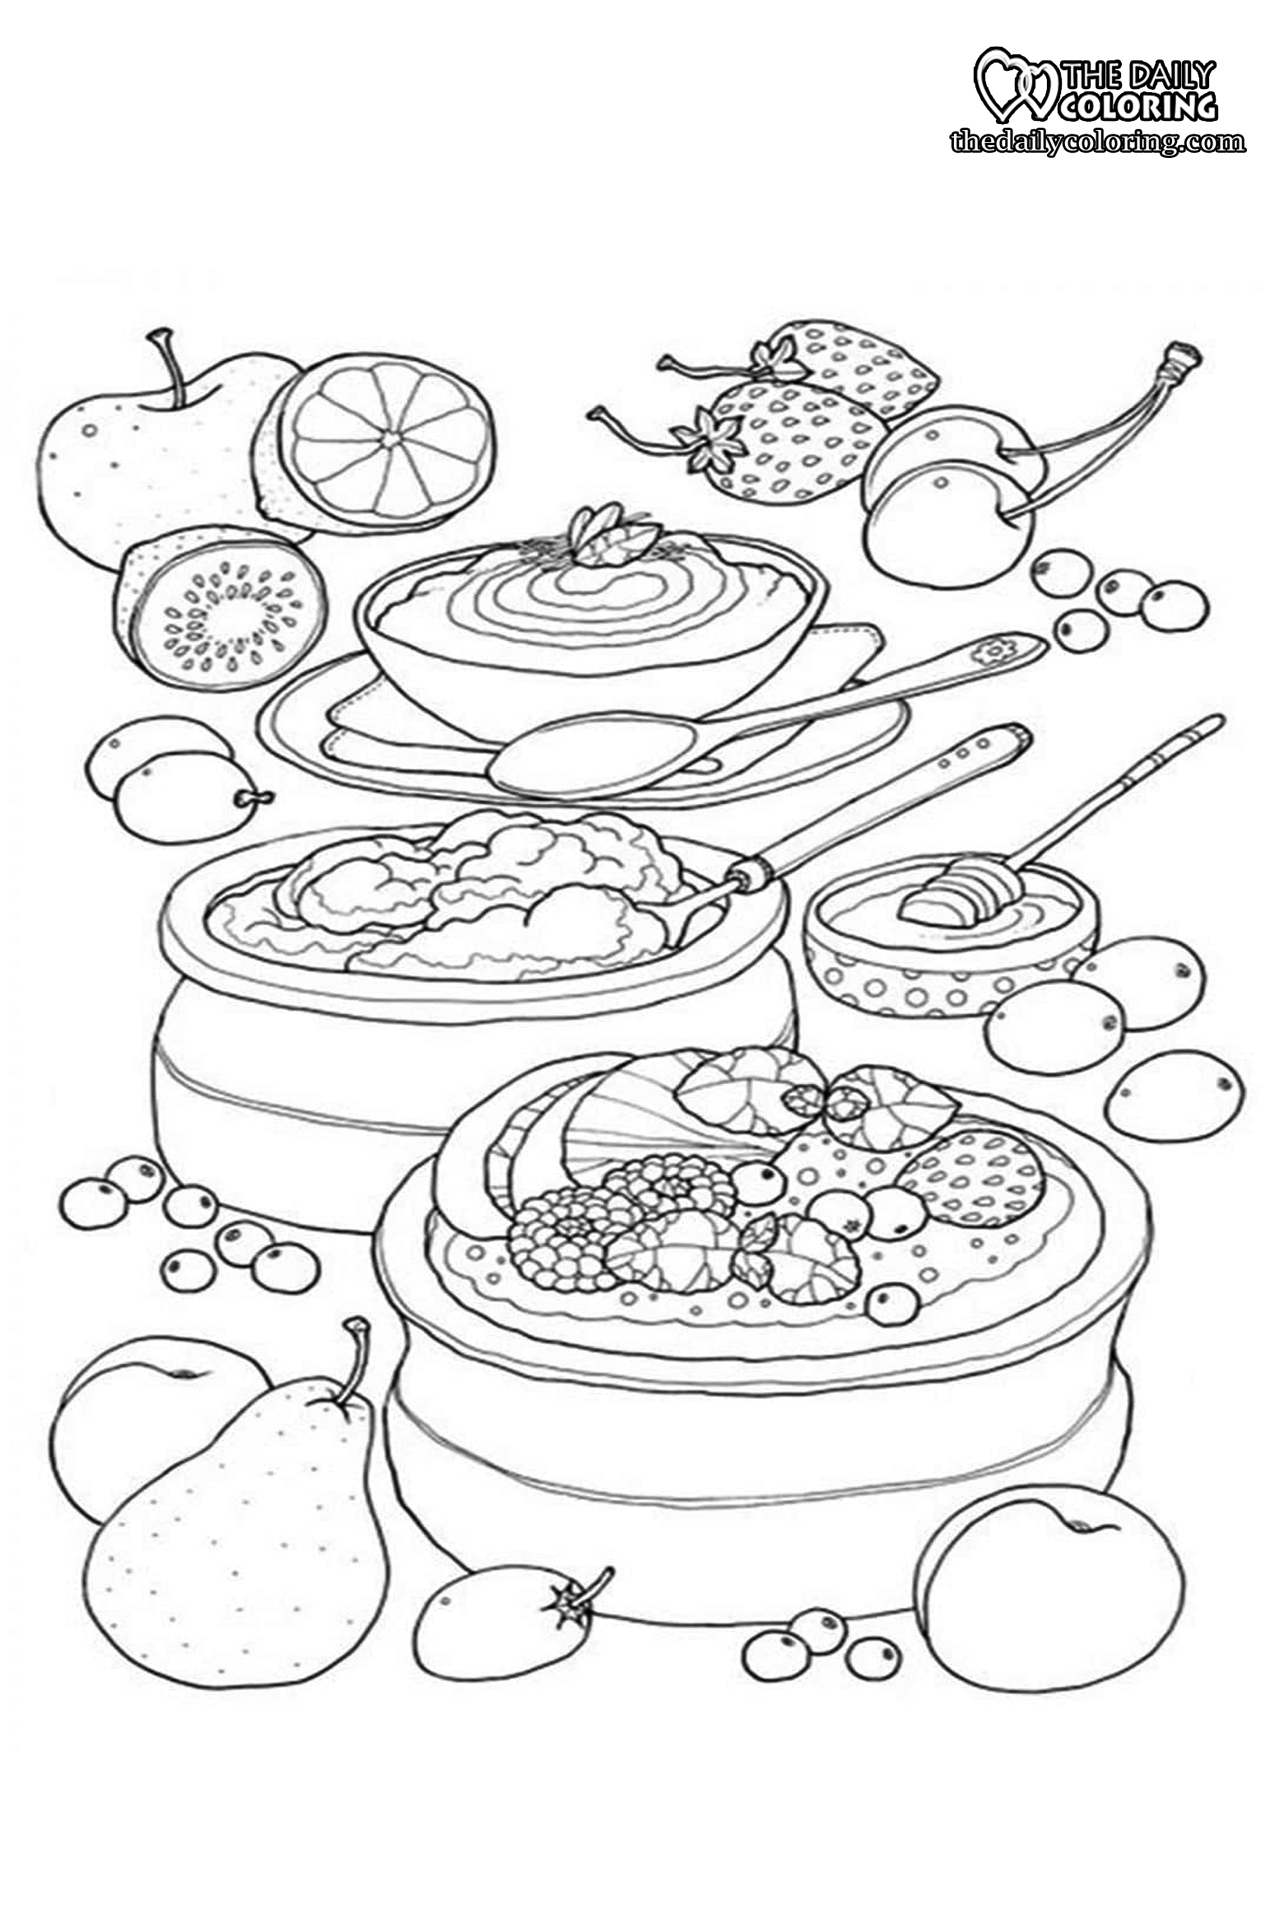 free printable food coloring pages 2022 the daily coloring